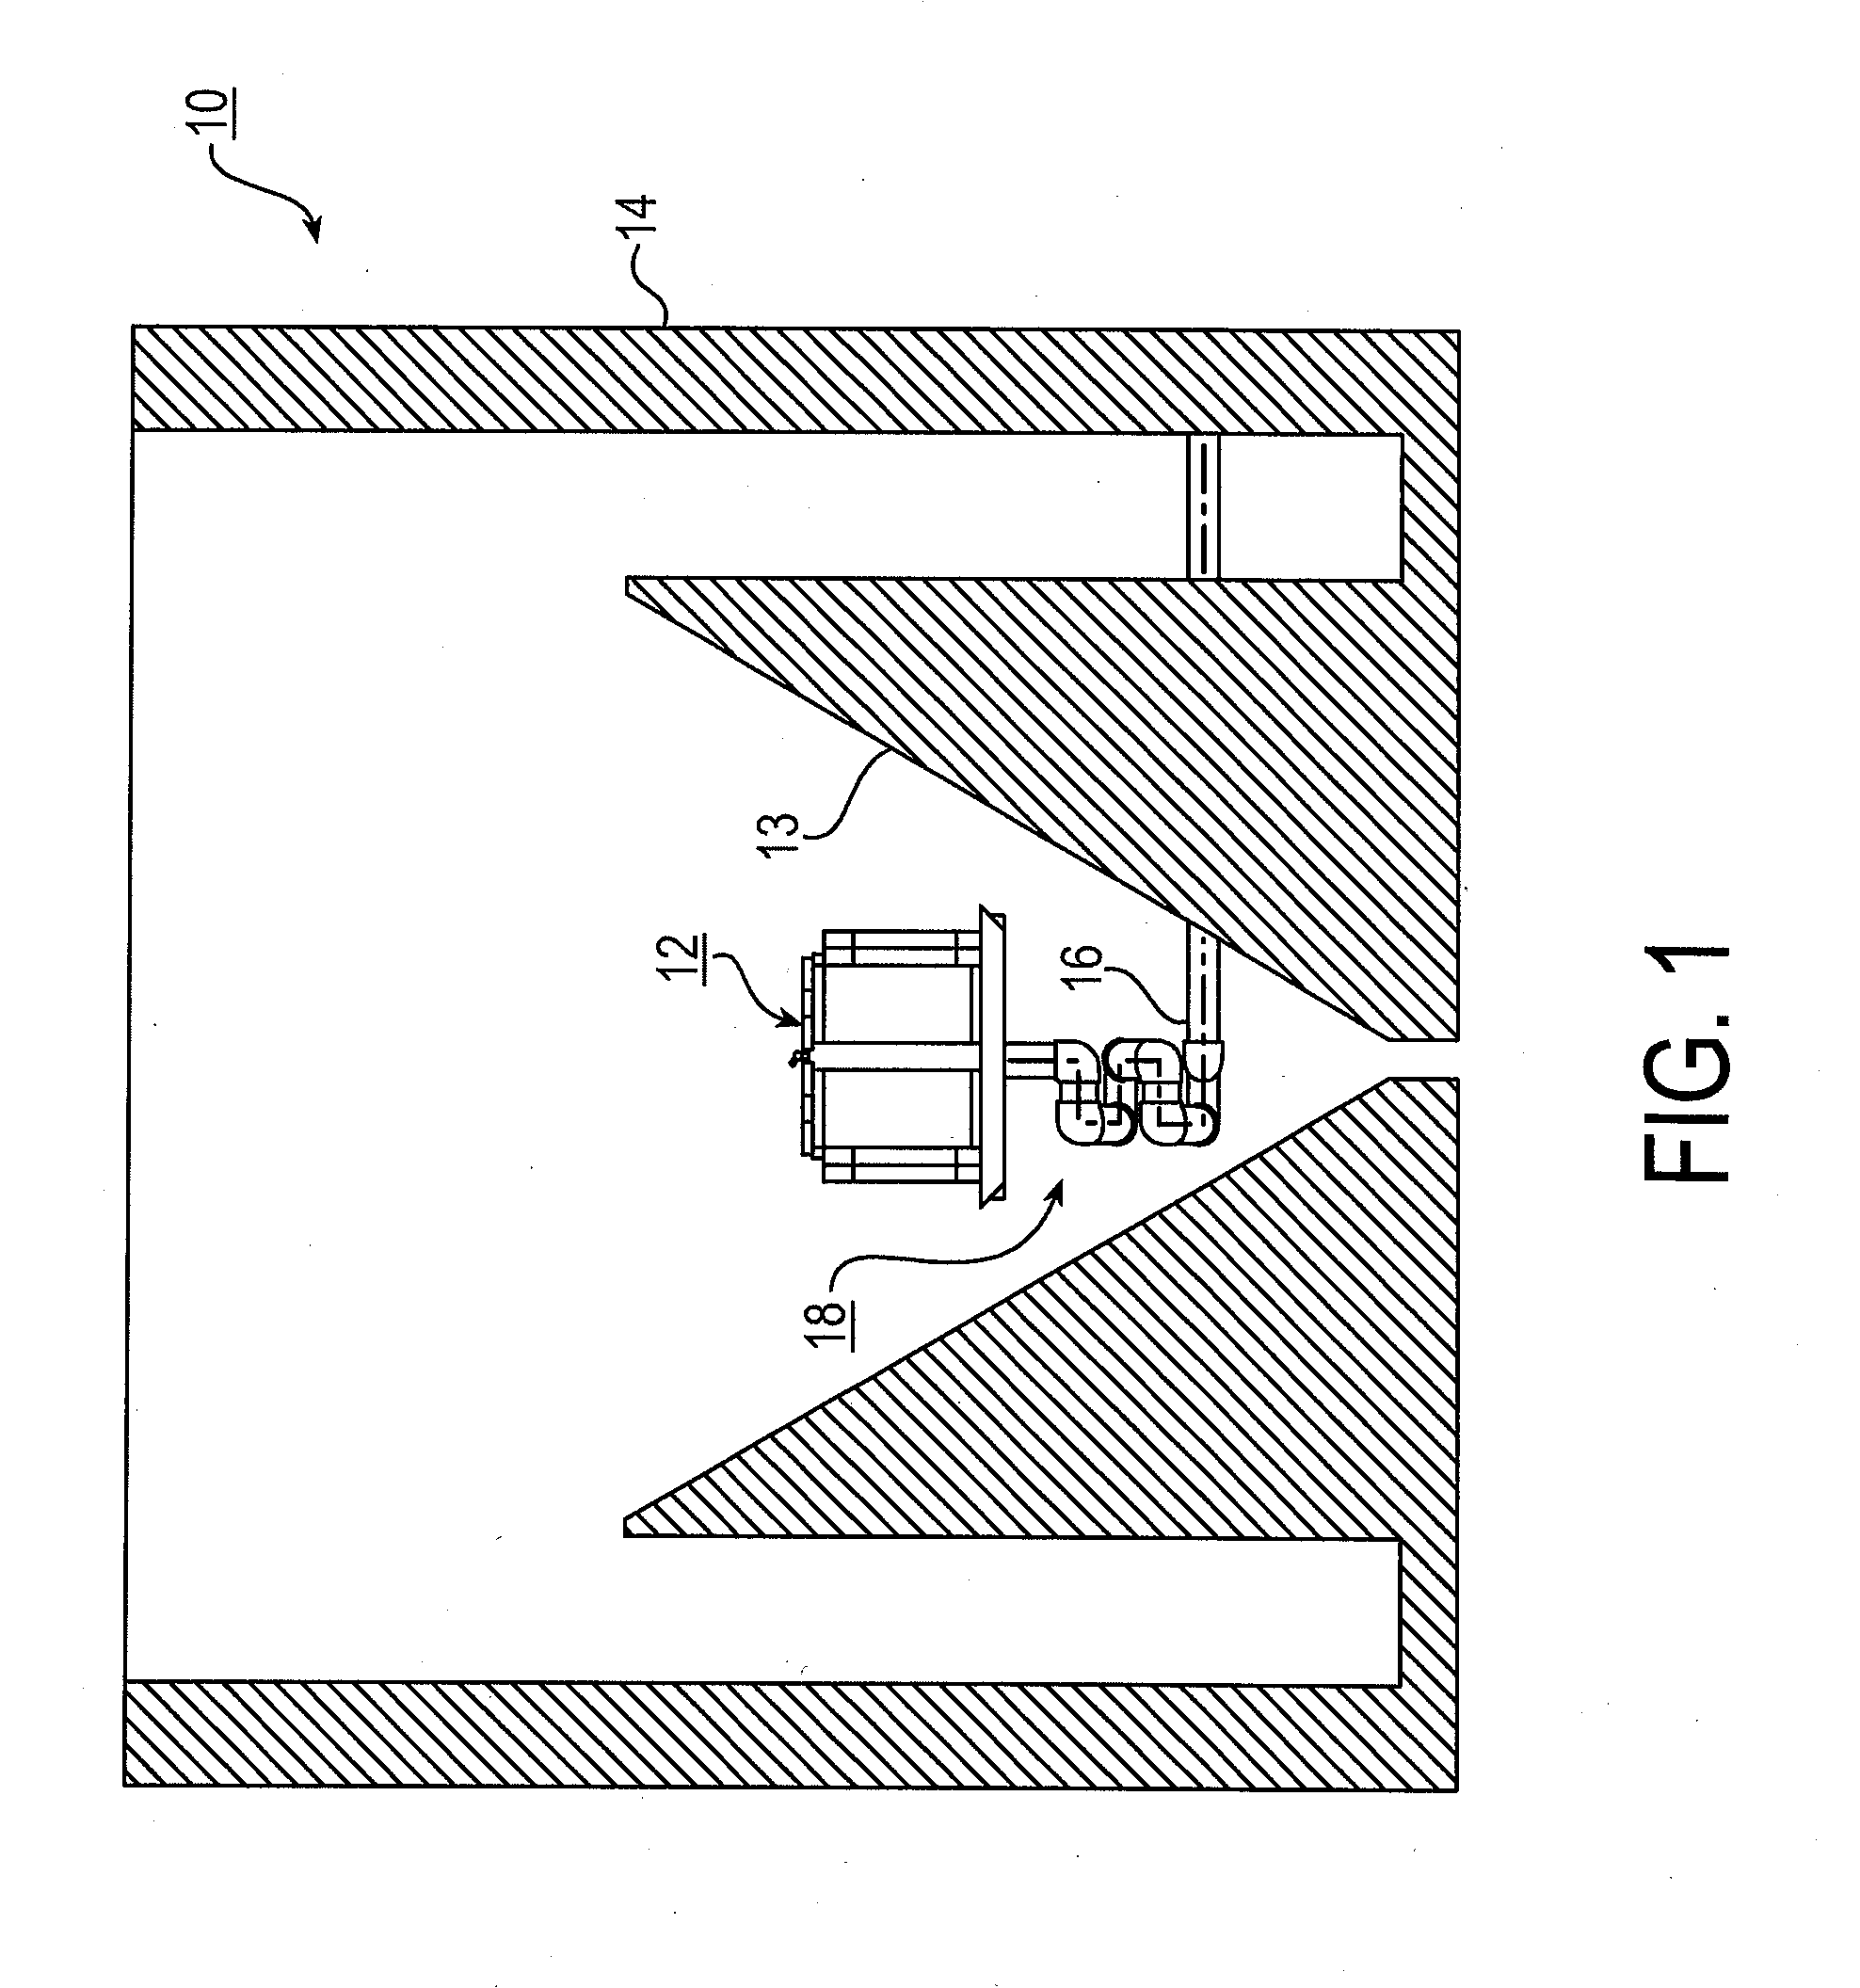 Foldable drain pipe for a decanter in a water treatment system